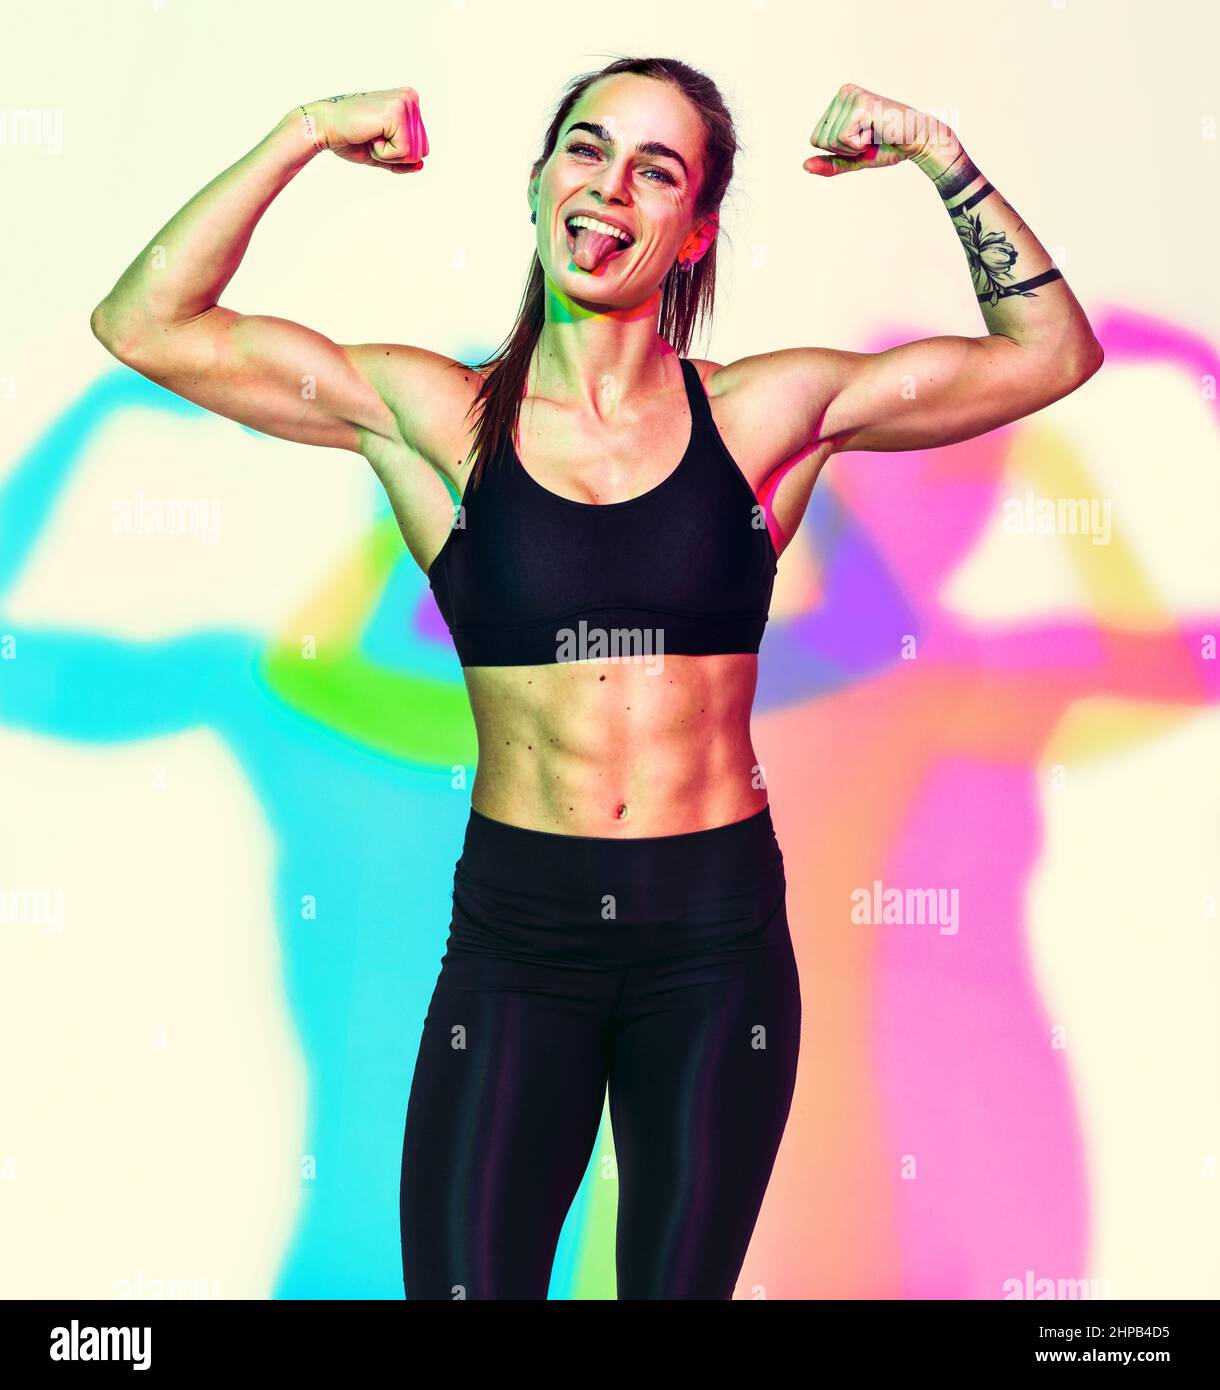 Strong woman after workout showing her muscles. Photo of woman with perfect physique on white background with effect of rgb colors shadows. Strength a Stock Photo